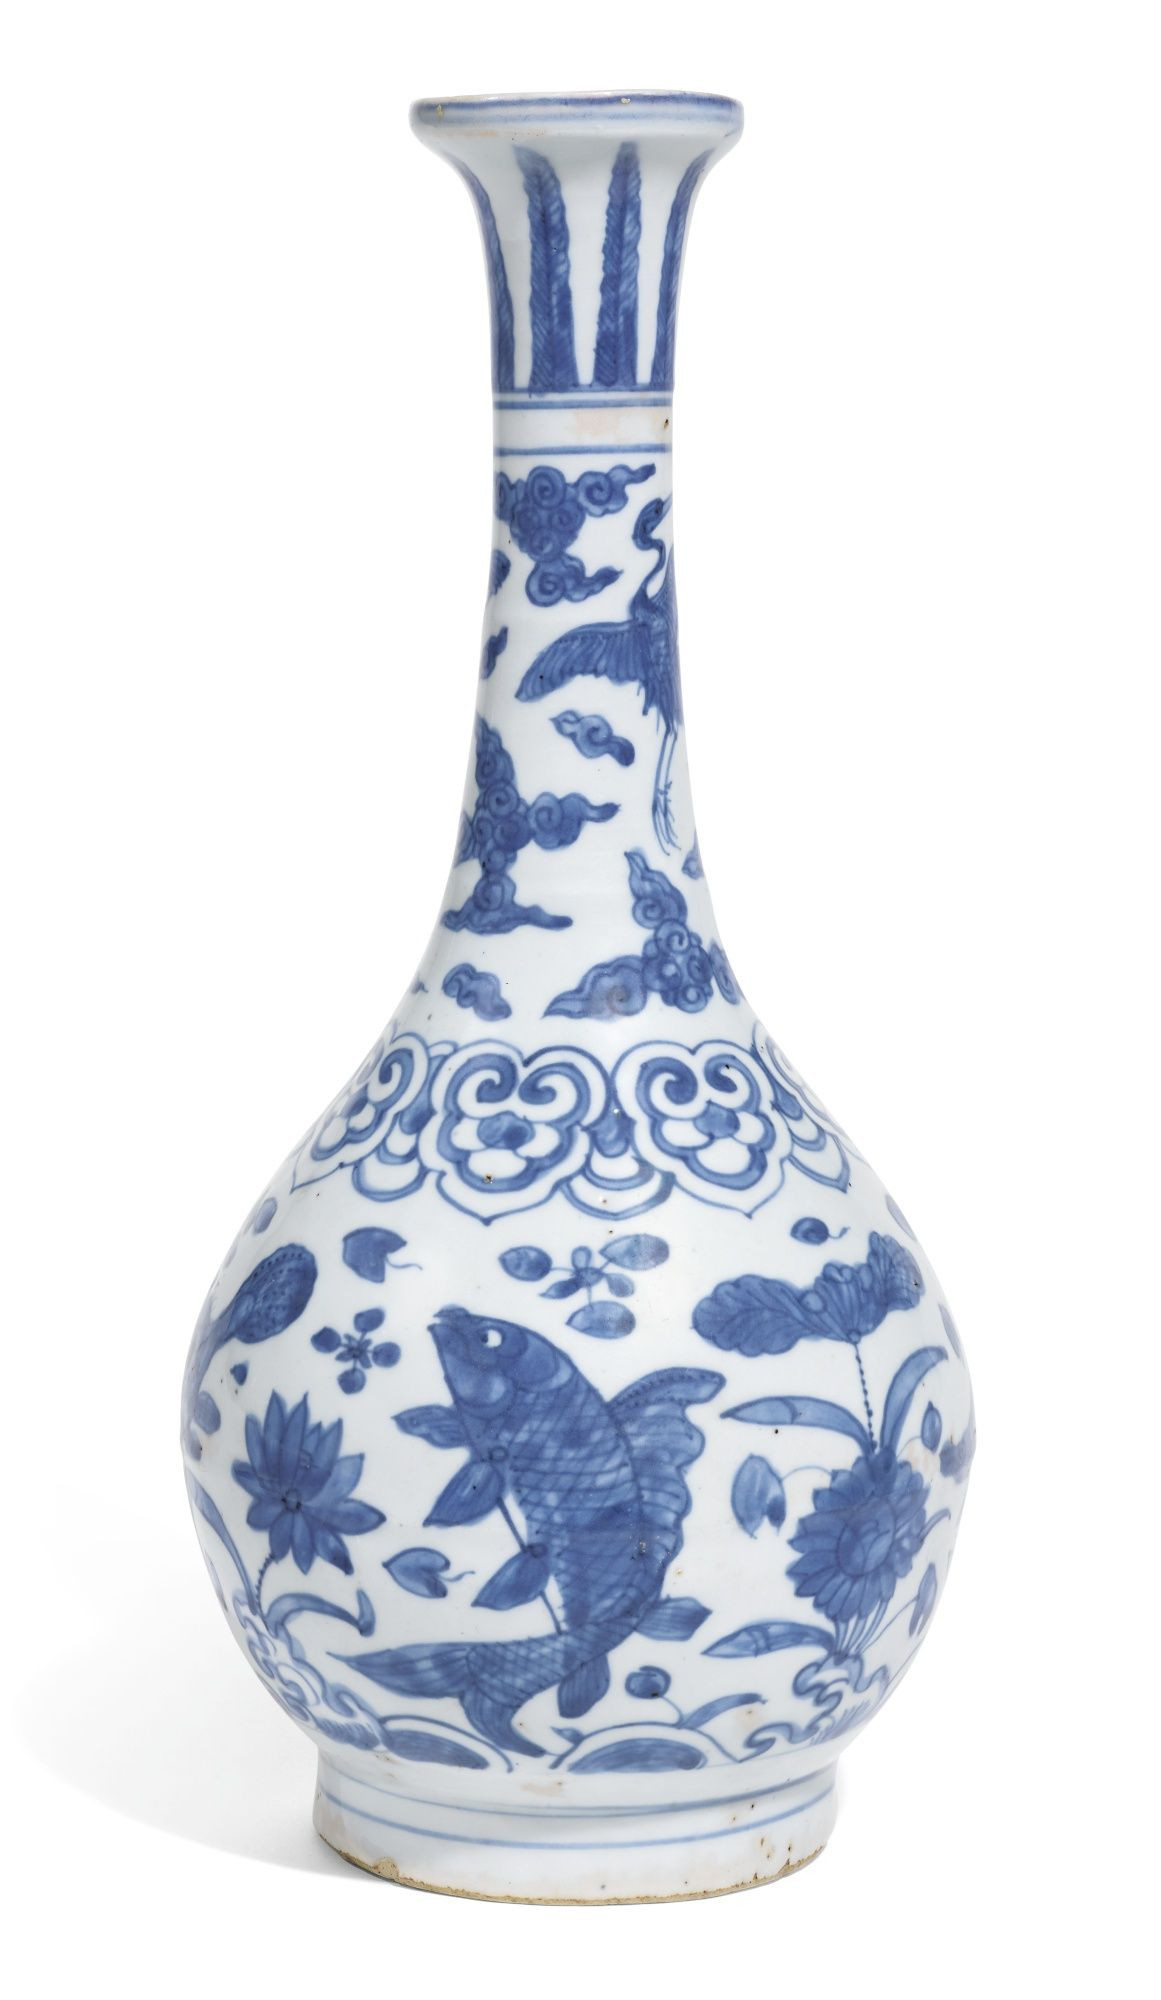 27 Recommended Chinese Meiping Vase 2024 free download chinese meiping vase of a blue and white bottle vase ming dynasty jiajing wanli period inside a blue and white bottle vase ming dynasty jiajing wanli period